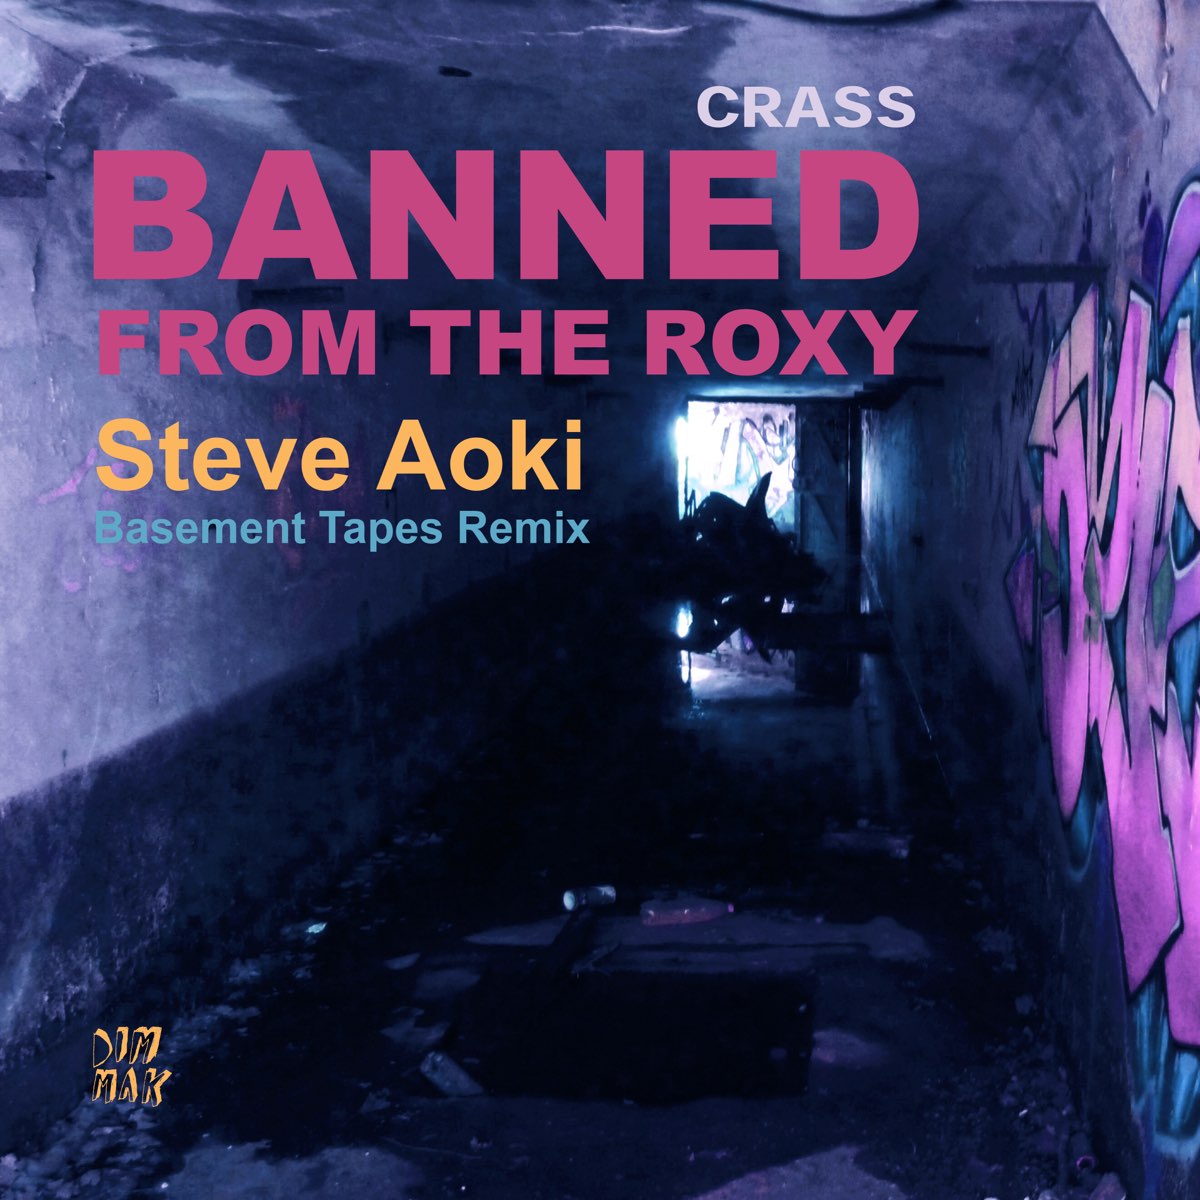 Banned From The Roxy (Steve Aoki's Basement Tapes Remix) - Single by Crass  on Apple Music